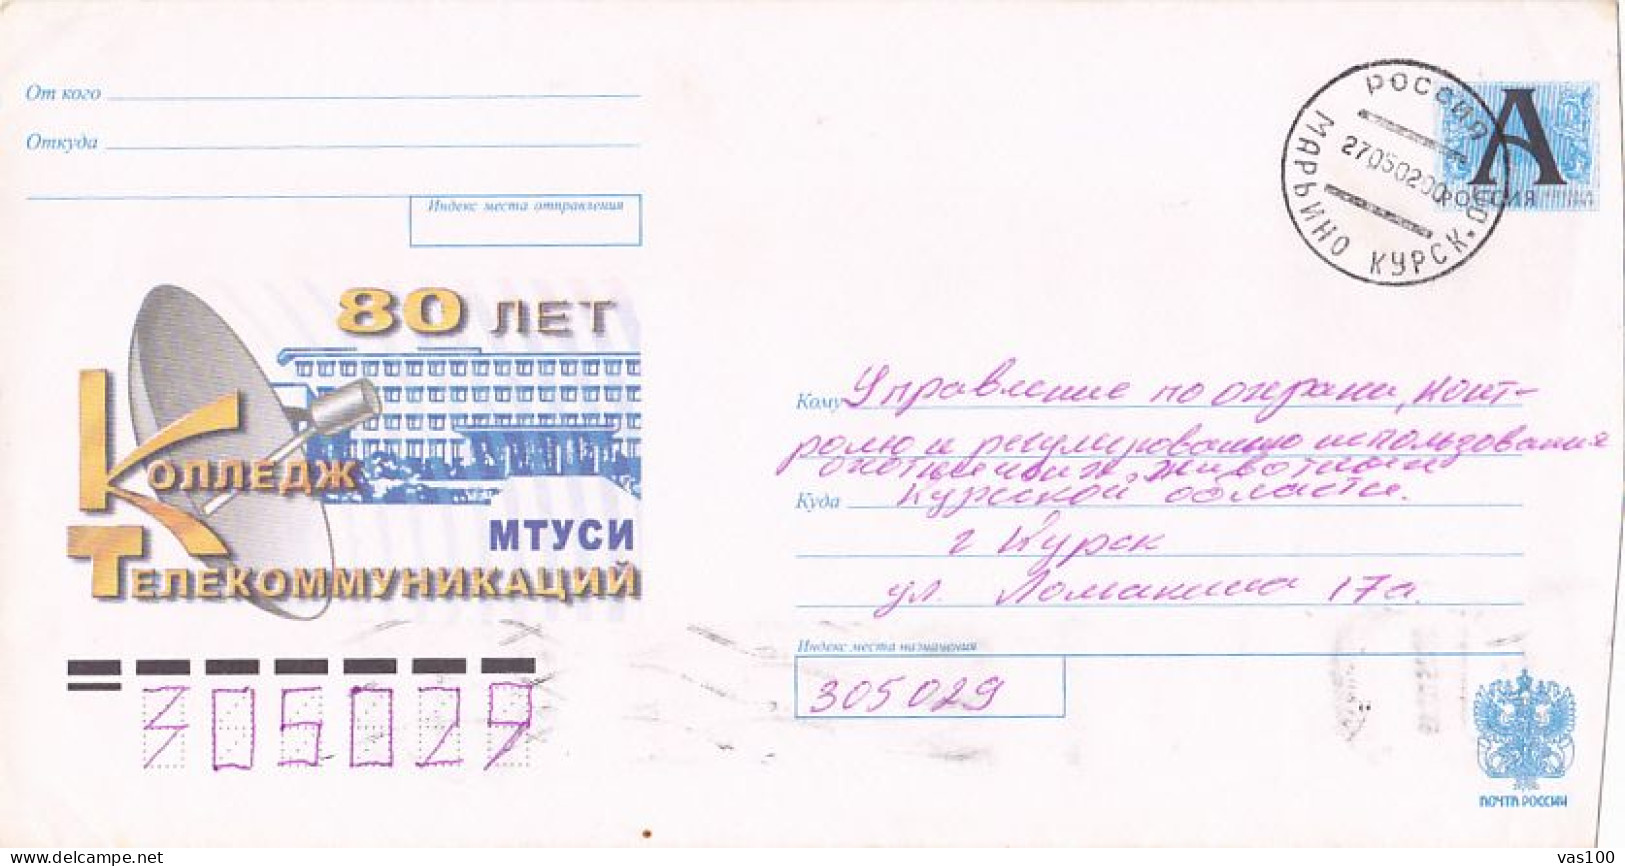 TELECOMMUNICATIONS COLLEGE ANNIVERSARY, COVER STATIONERY, ENTIER POSTAL, 2000, RUSSIA - Stamped Stationery